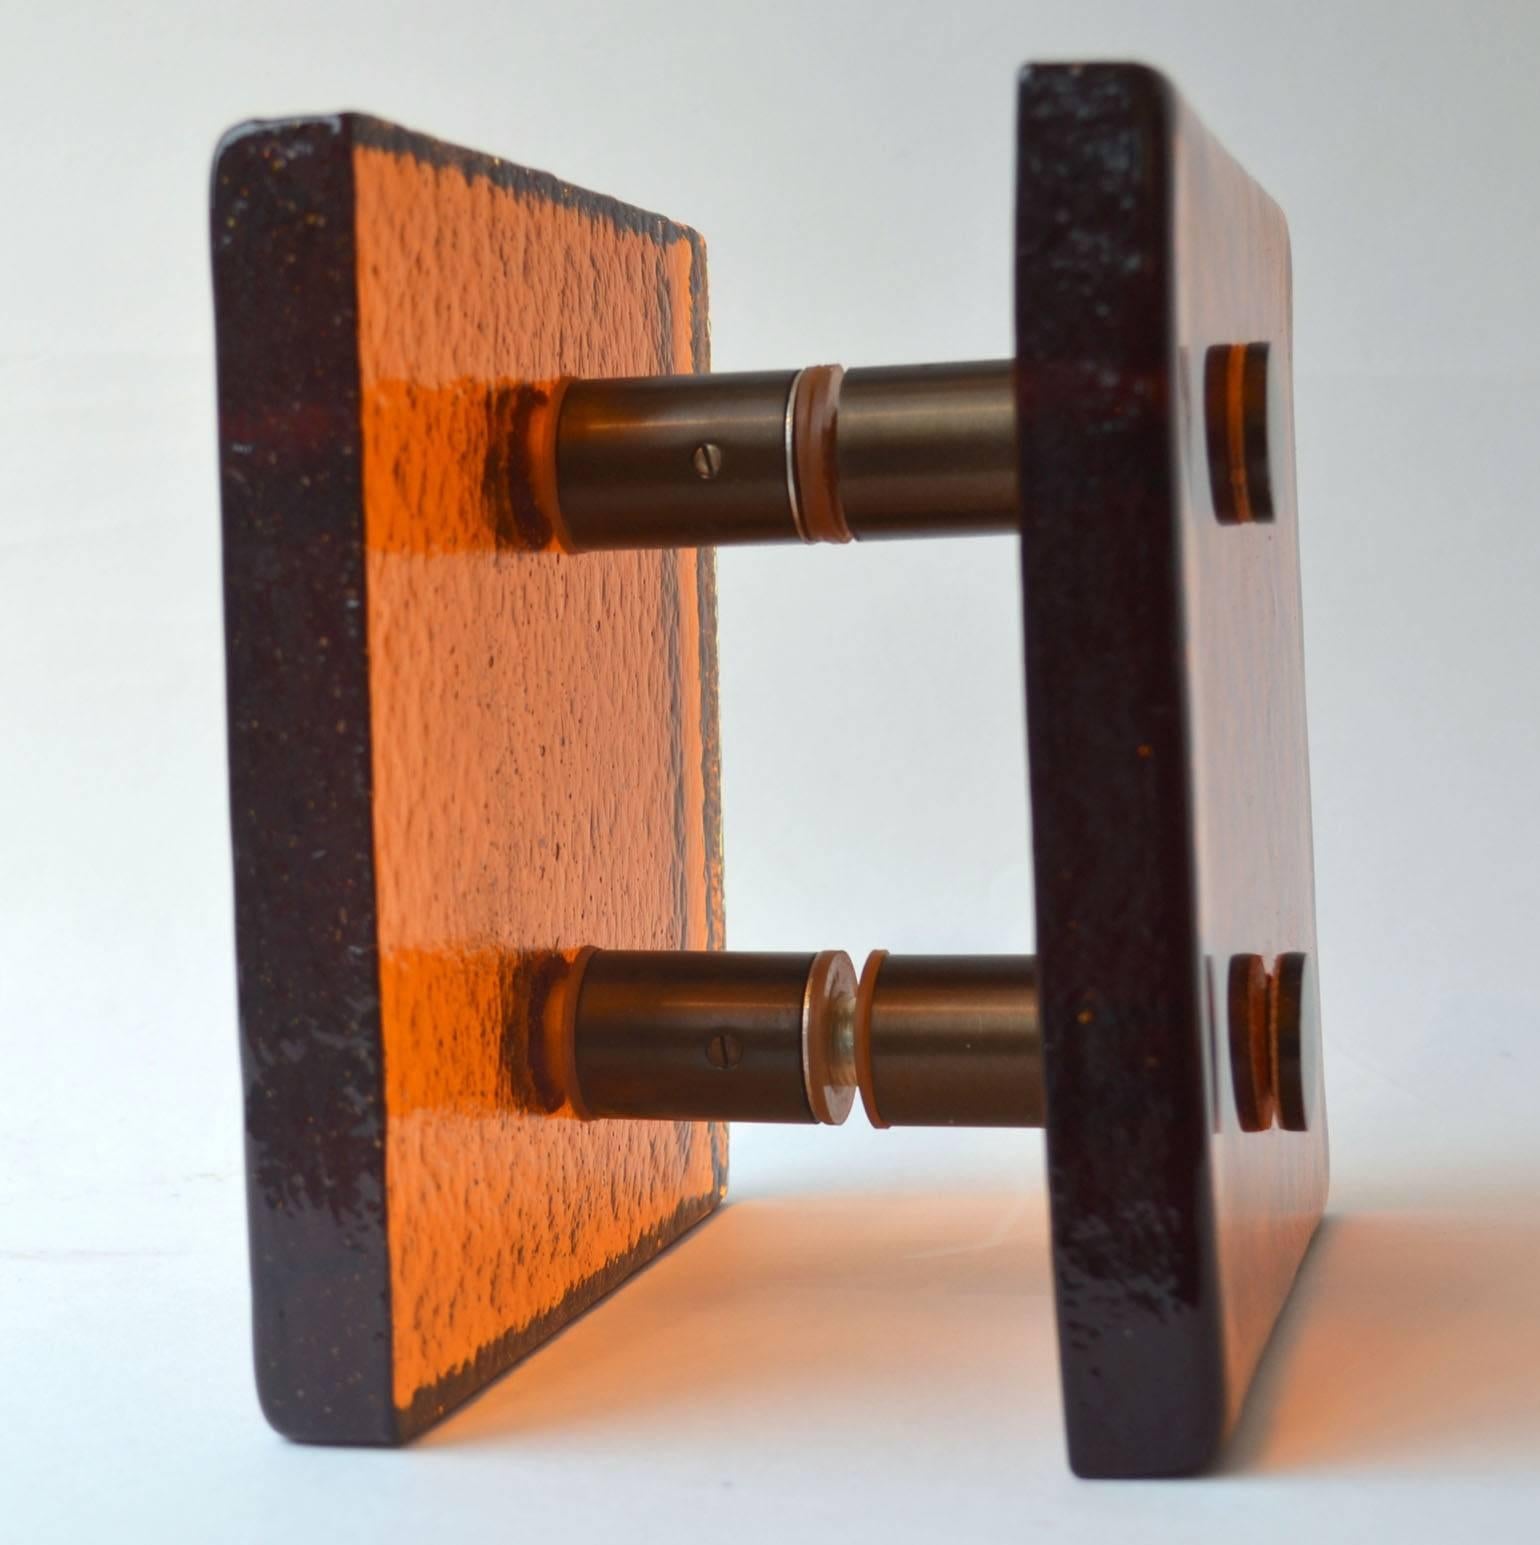 Orange cast glass push and pull door handle with chrome fittings designed for a glass door.

